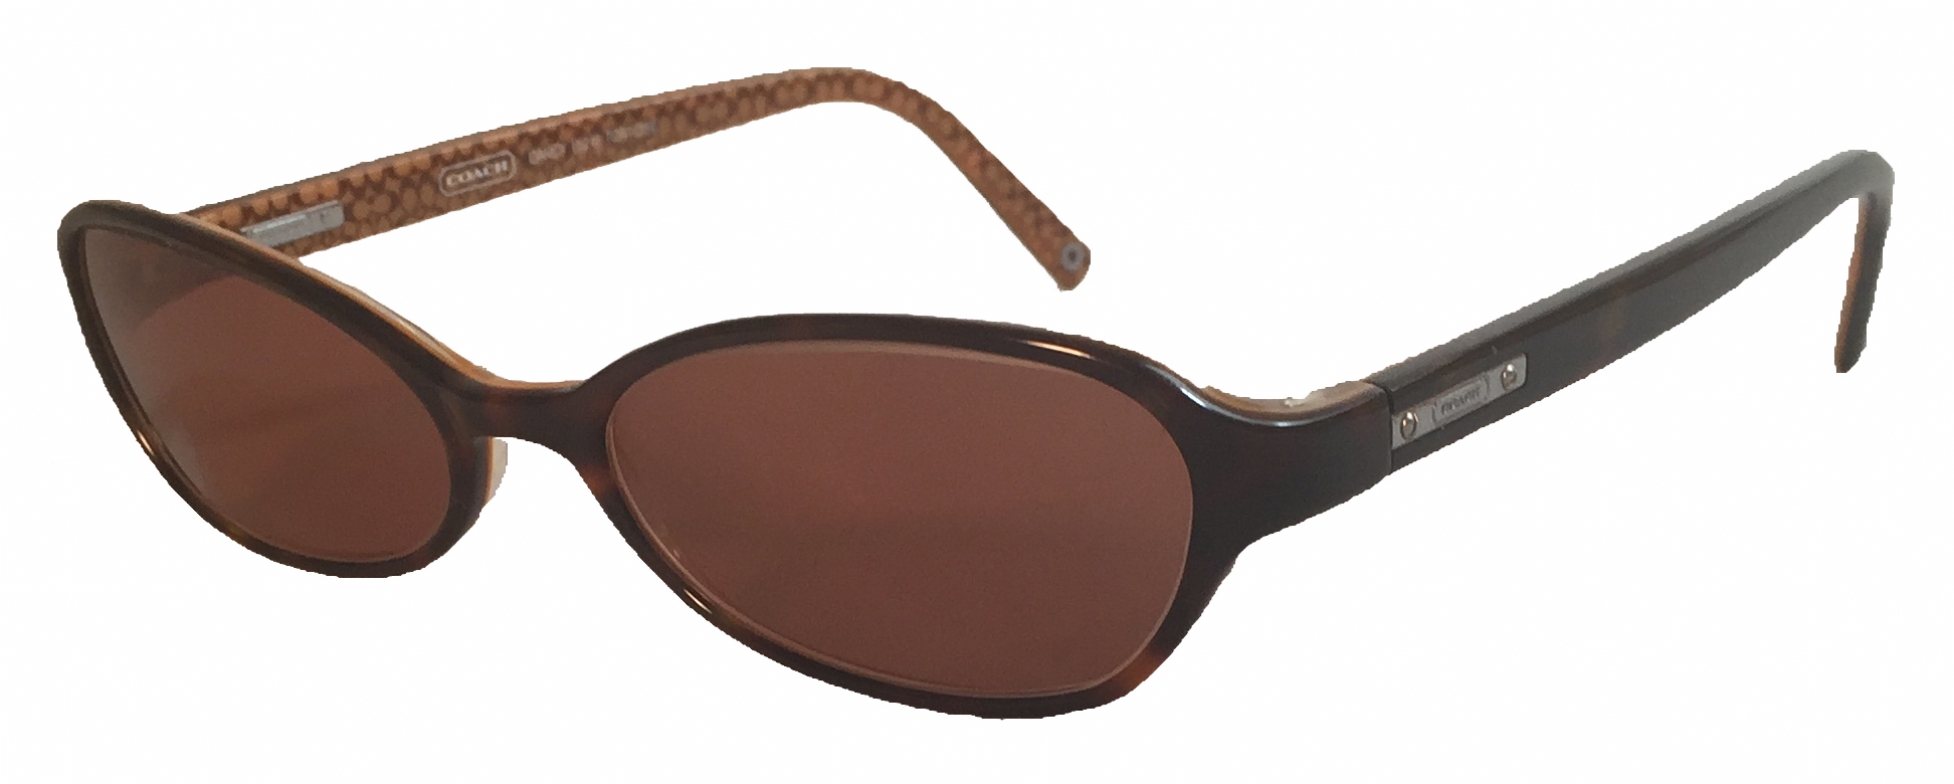 clearance COACH DARCY 524  SUNGLASSES